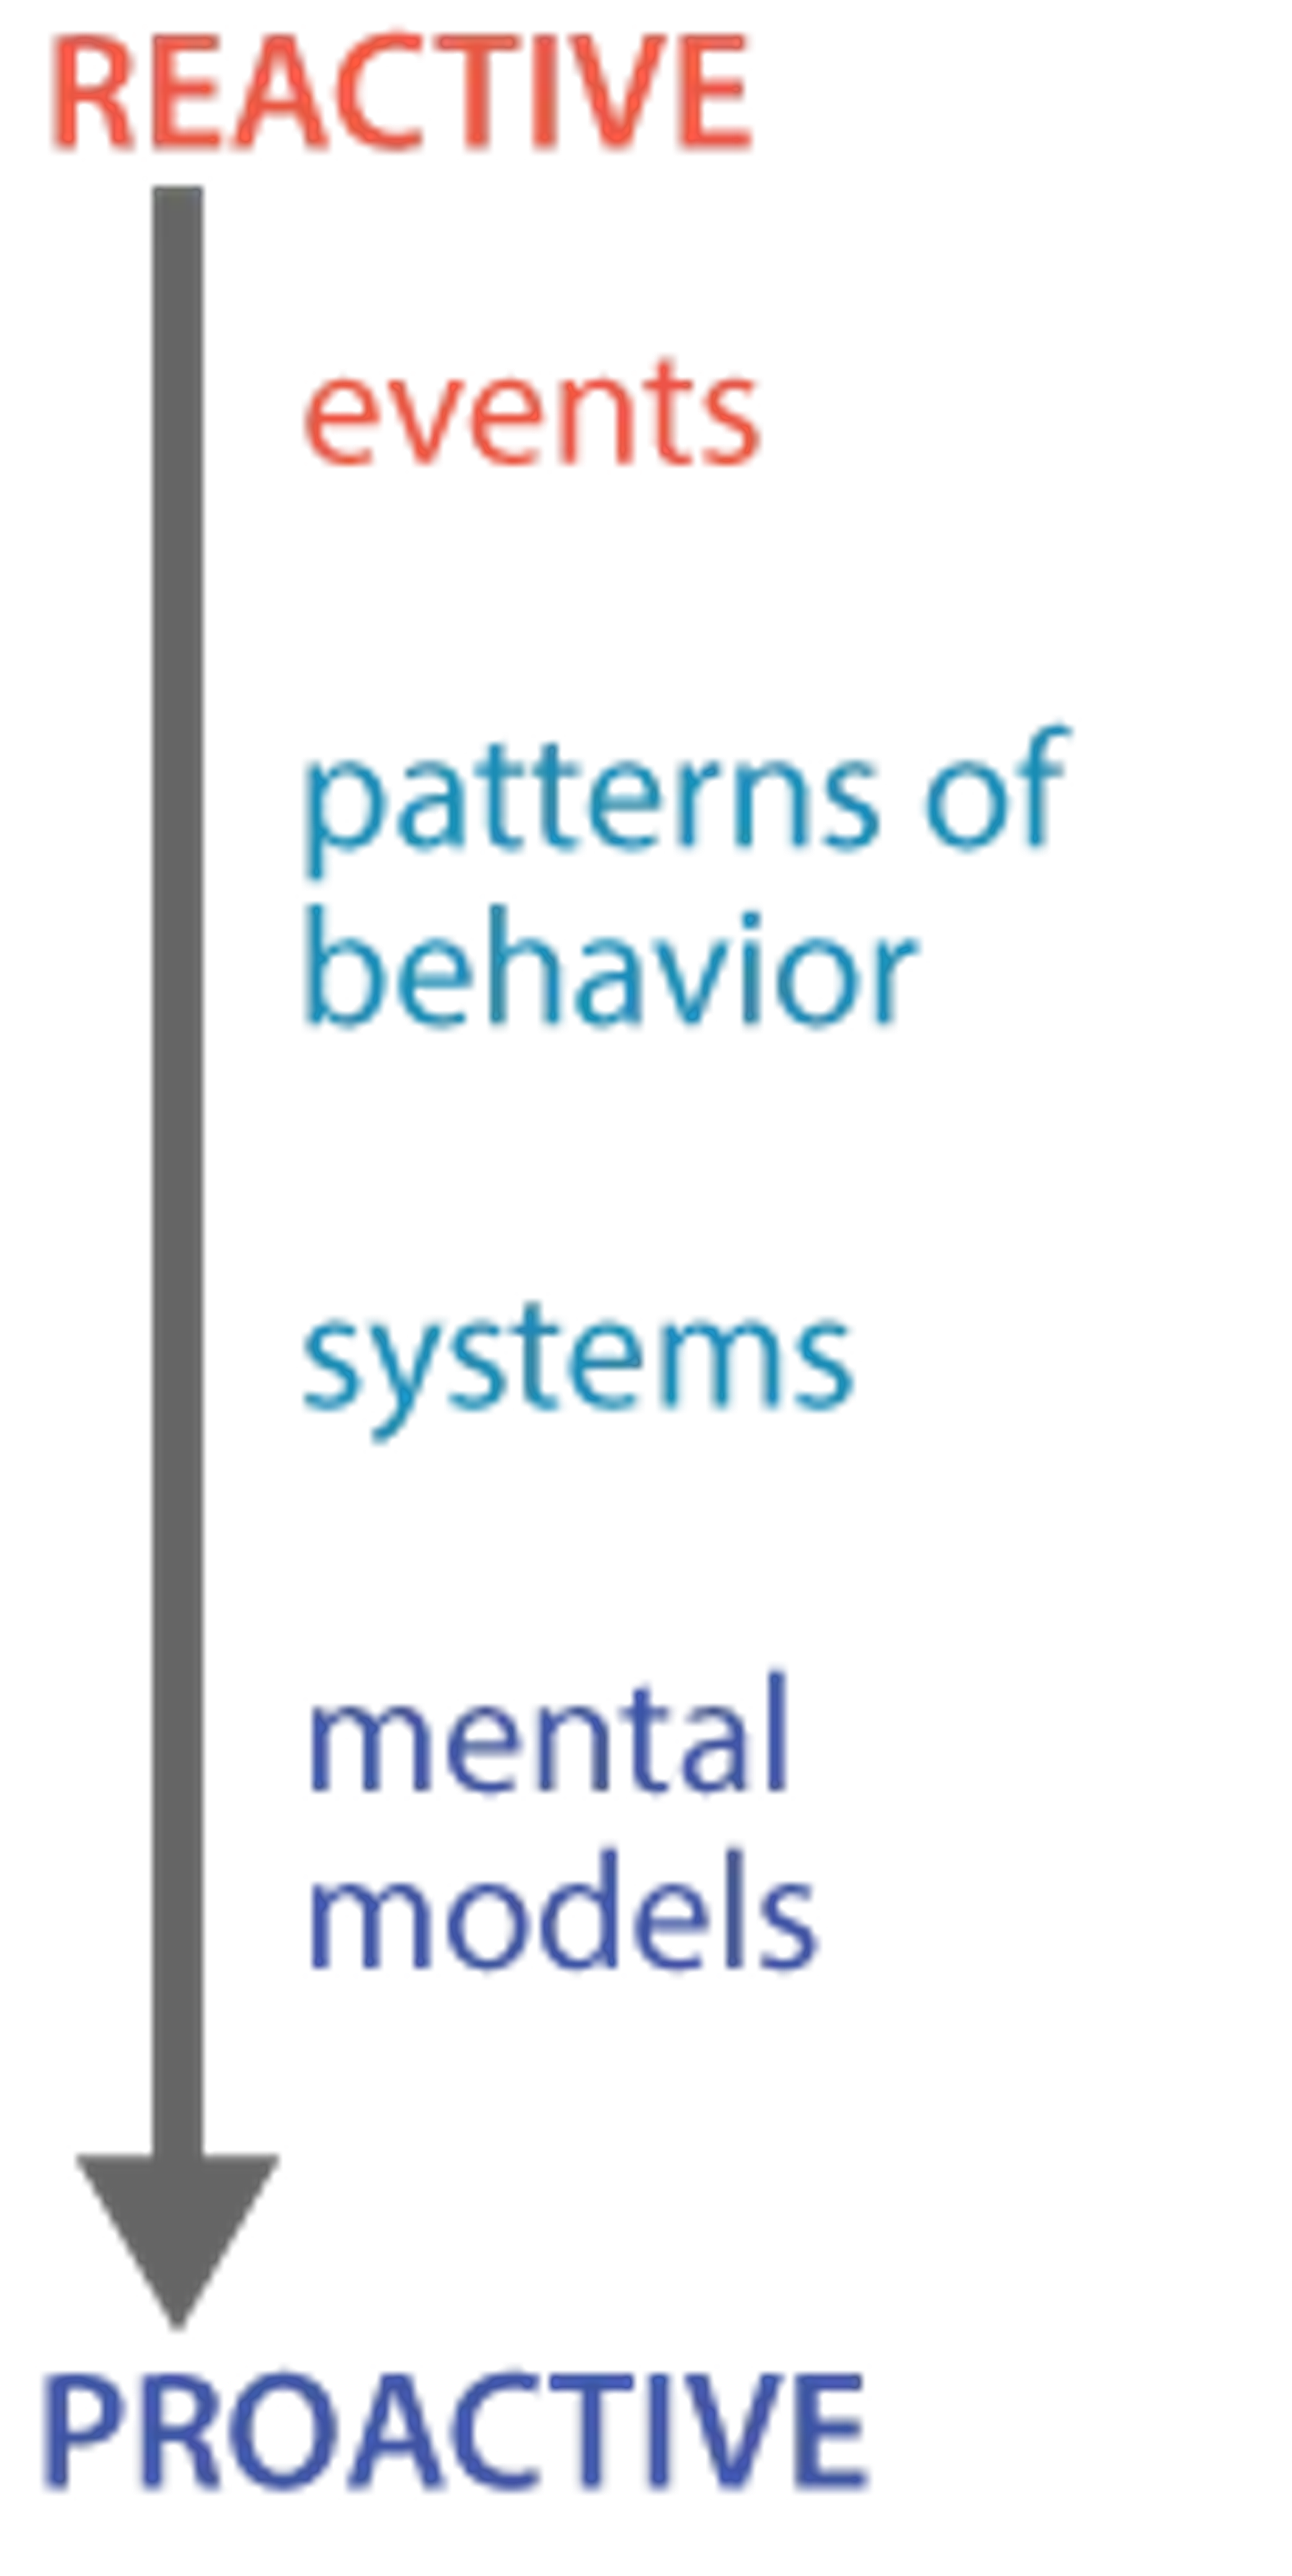 Diagram showing the hierarchy of system management: "Reactive" to "Proactive" with items in order "events", "patterns of behavior", "systems", and "mental models"